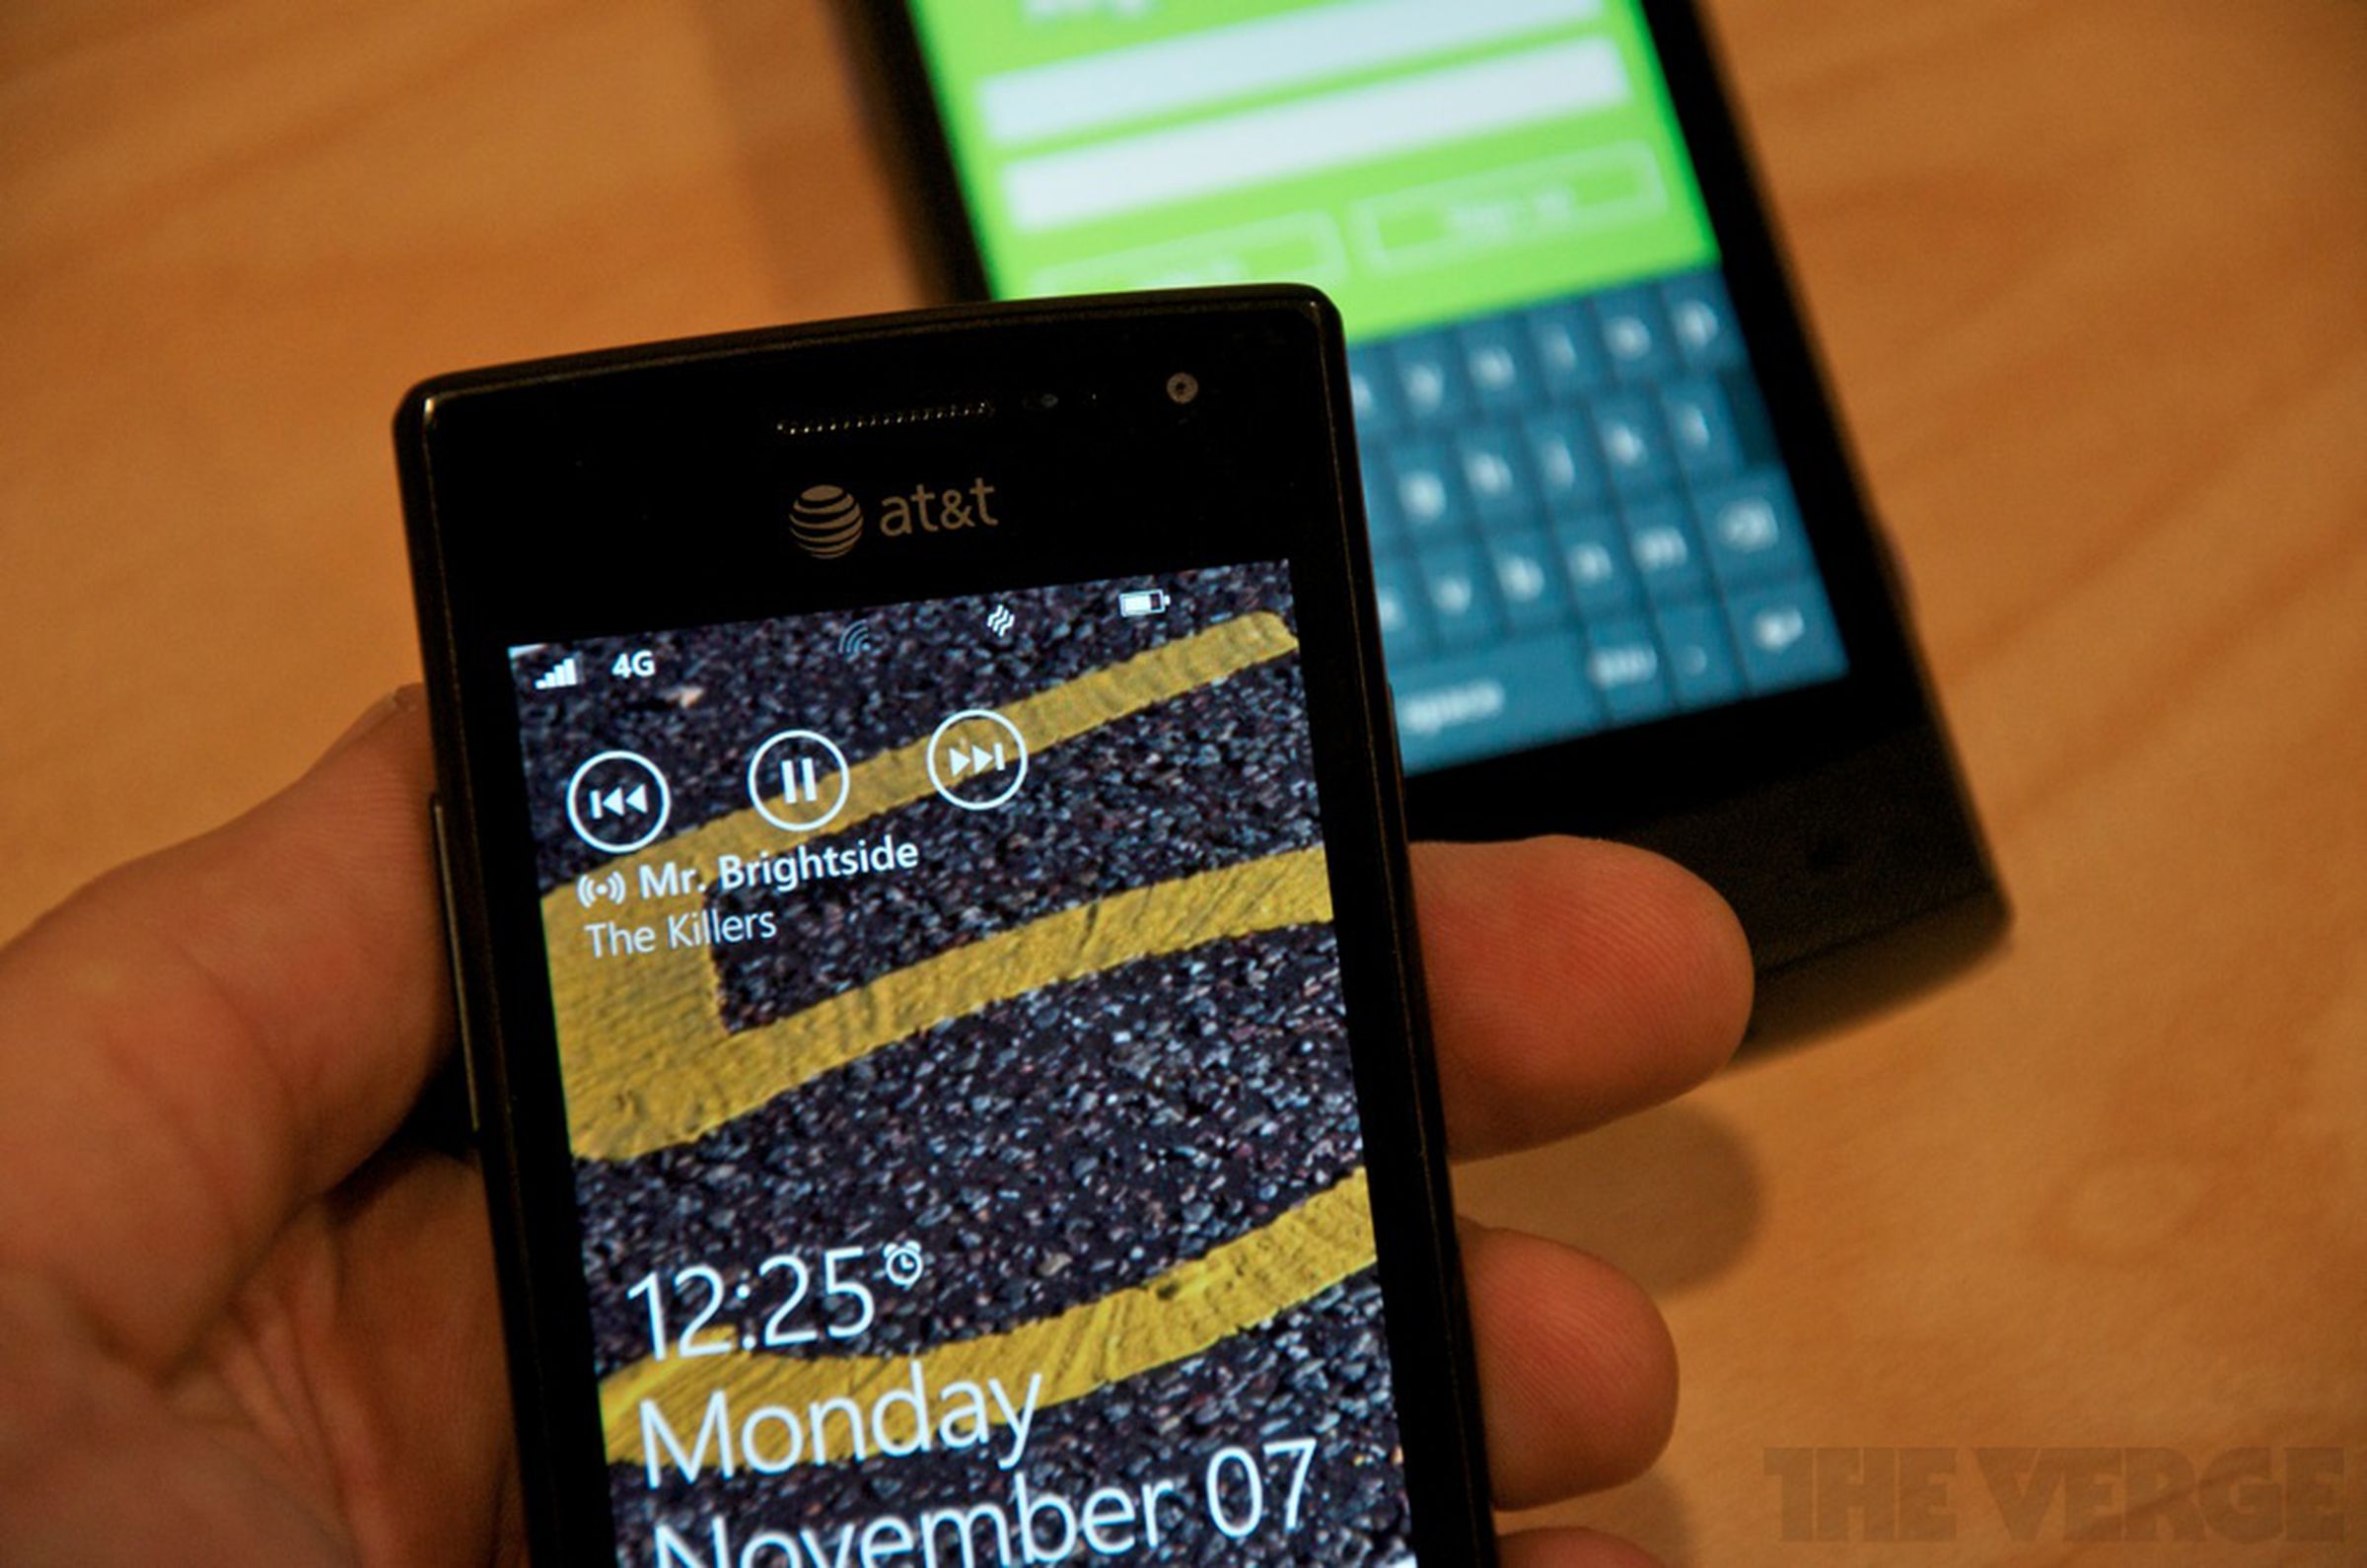 Spotify for Windows Phone 7 hands-on